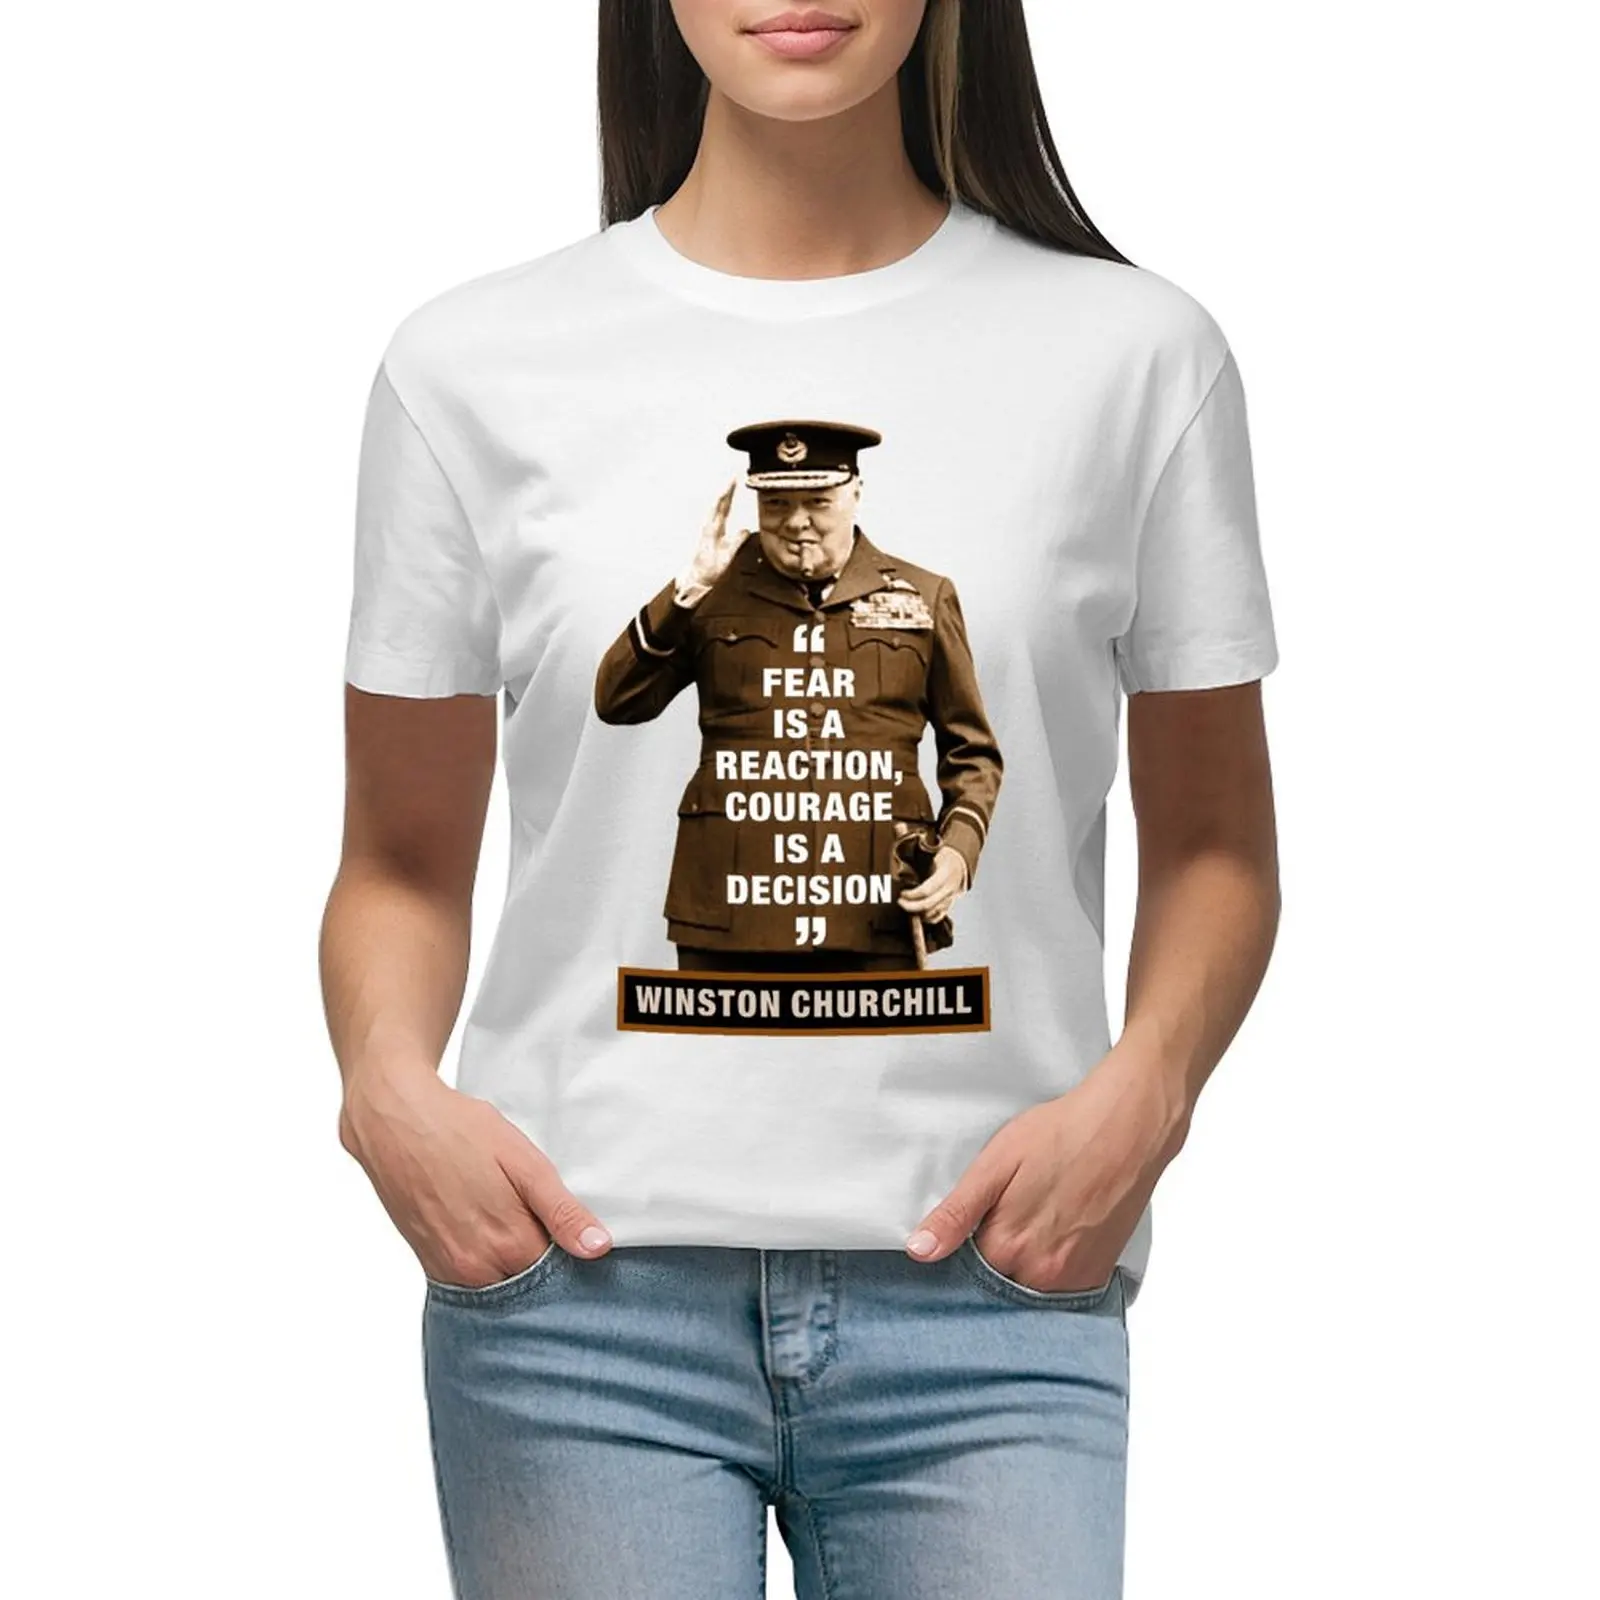 

Winston Churchill Fear Is A Reaction, Courage Is A Decision T-shirt kawaii clothes summer top Woman T-shirts